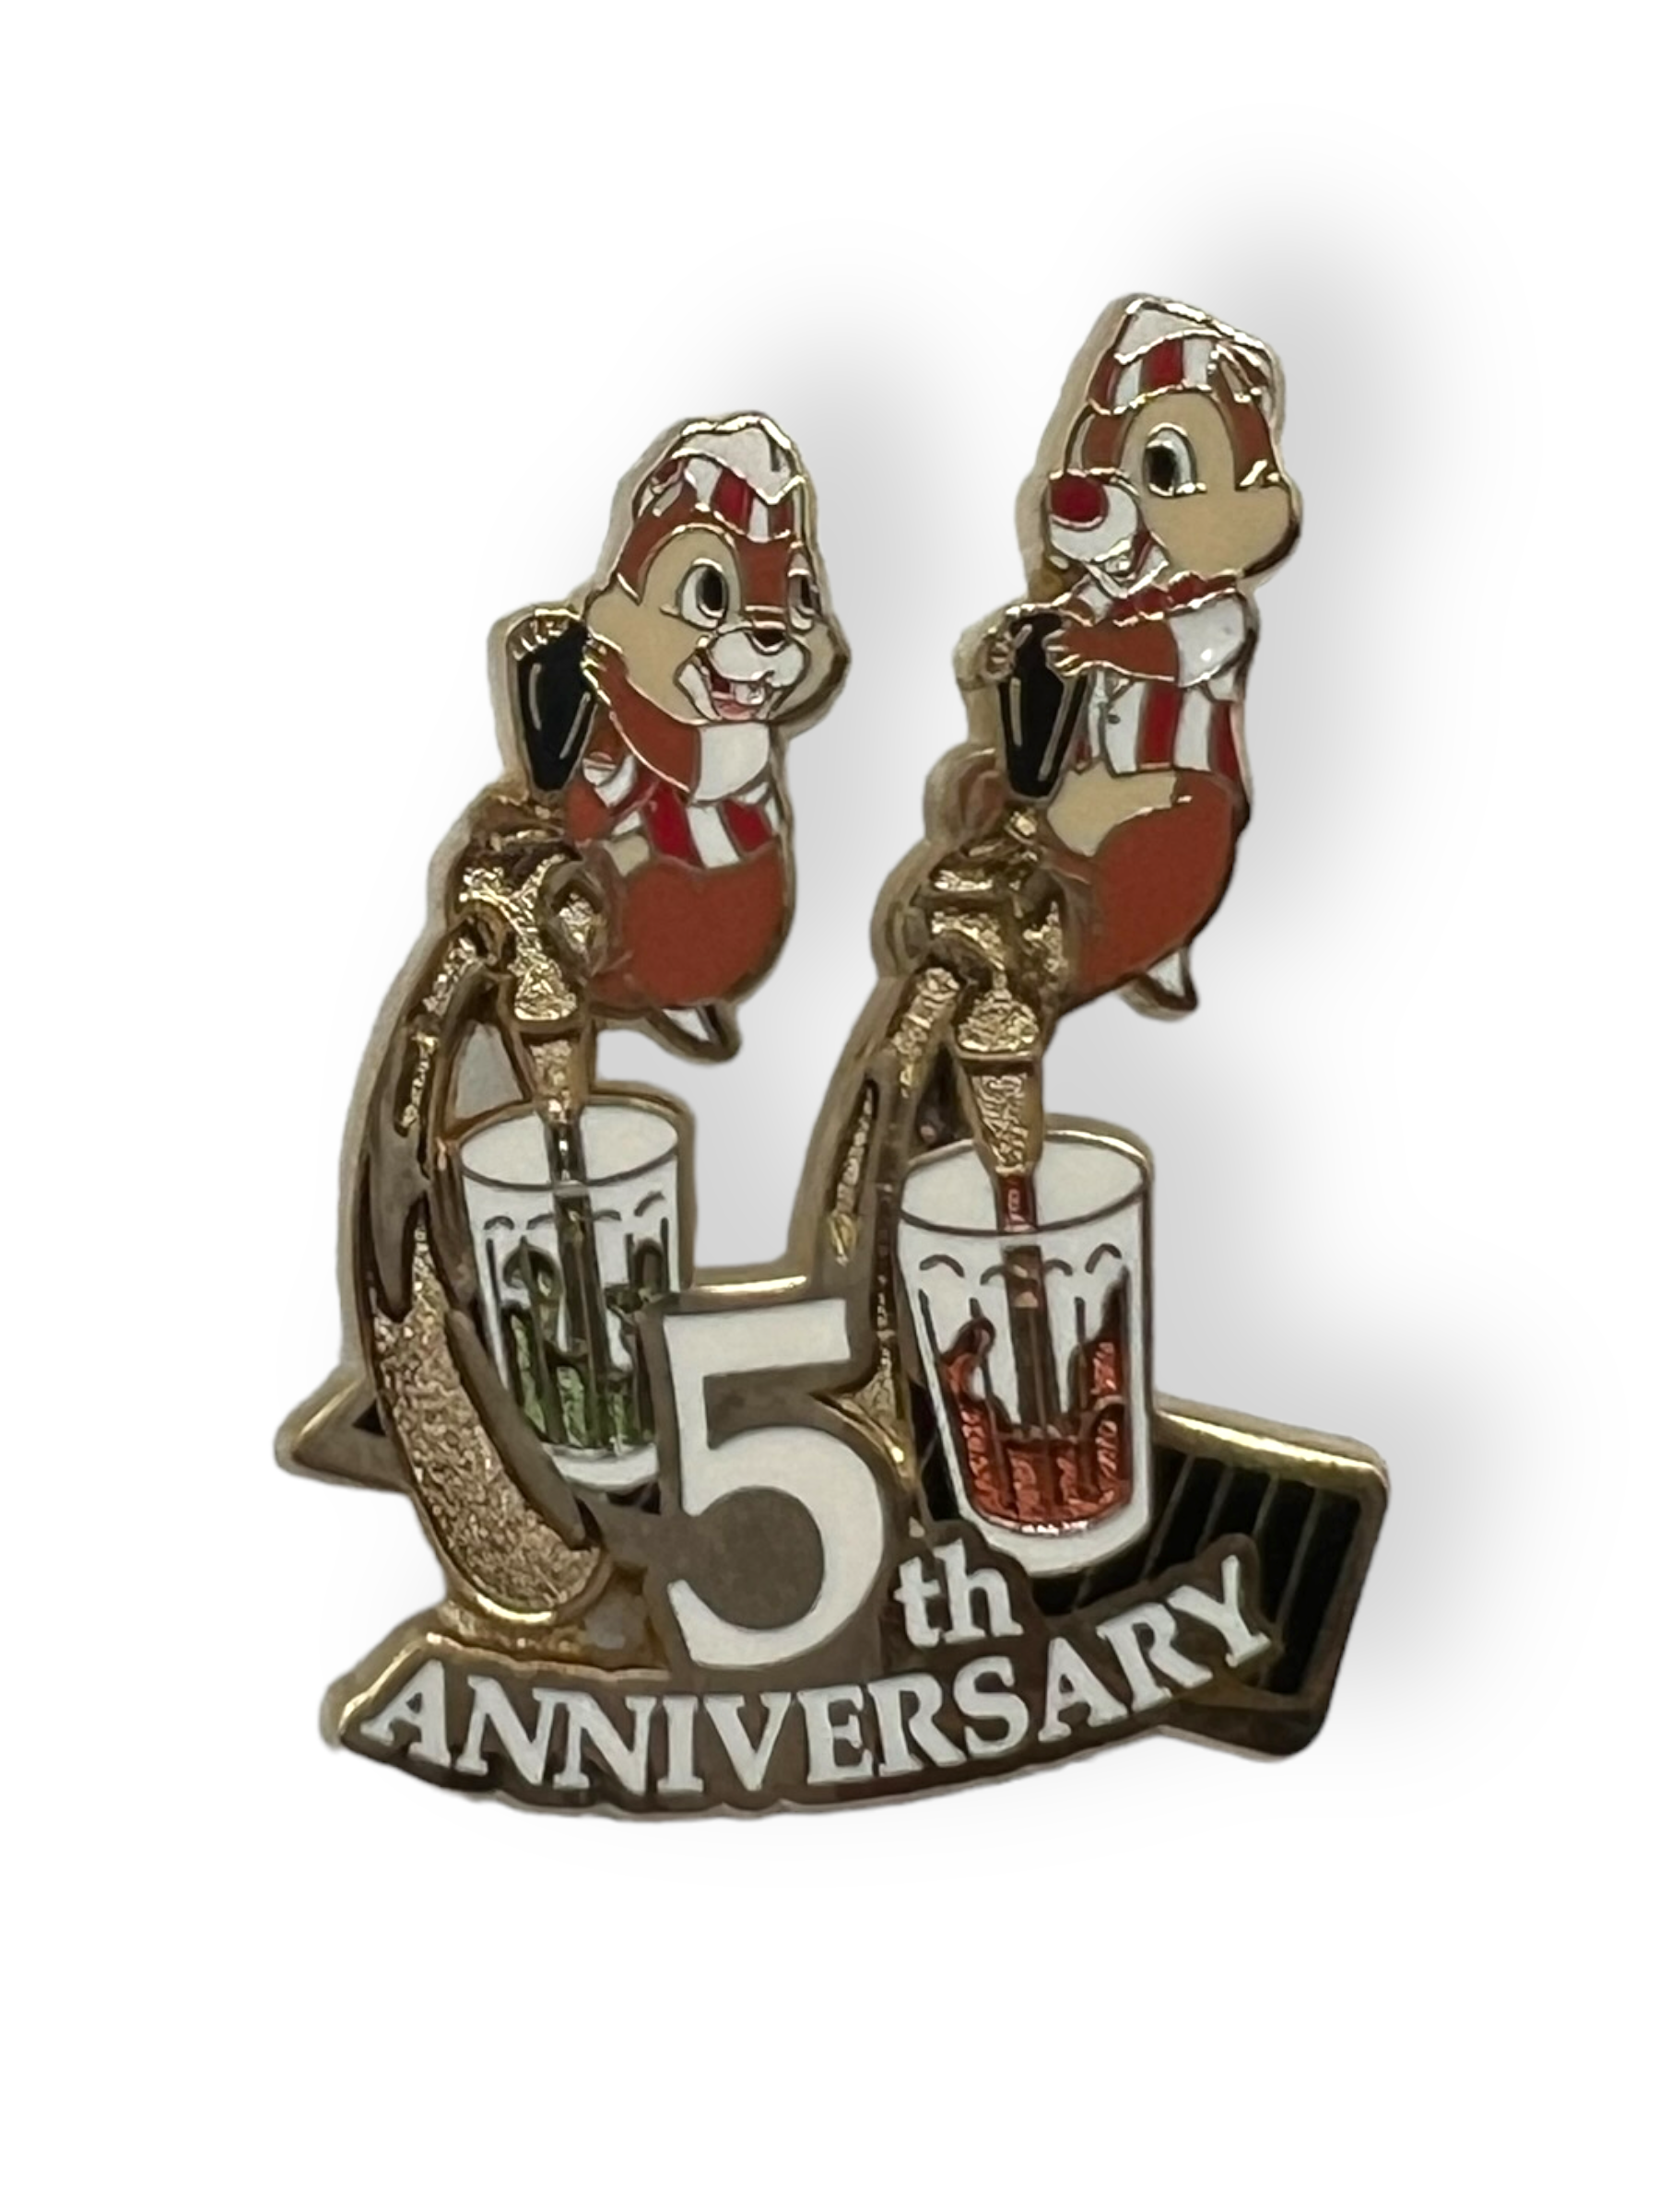 DSSH 5th Anniversary Chip n Dale Pin and Lanyard Set